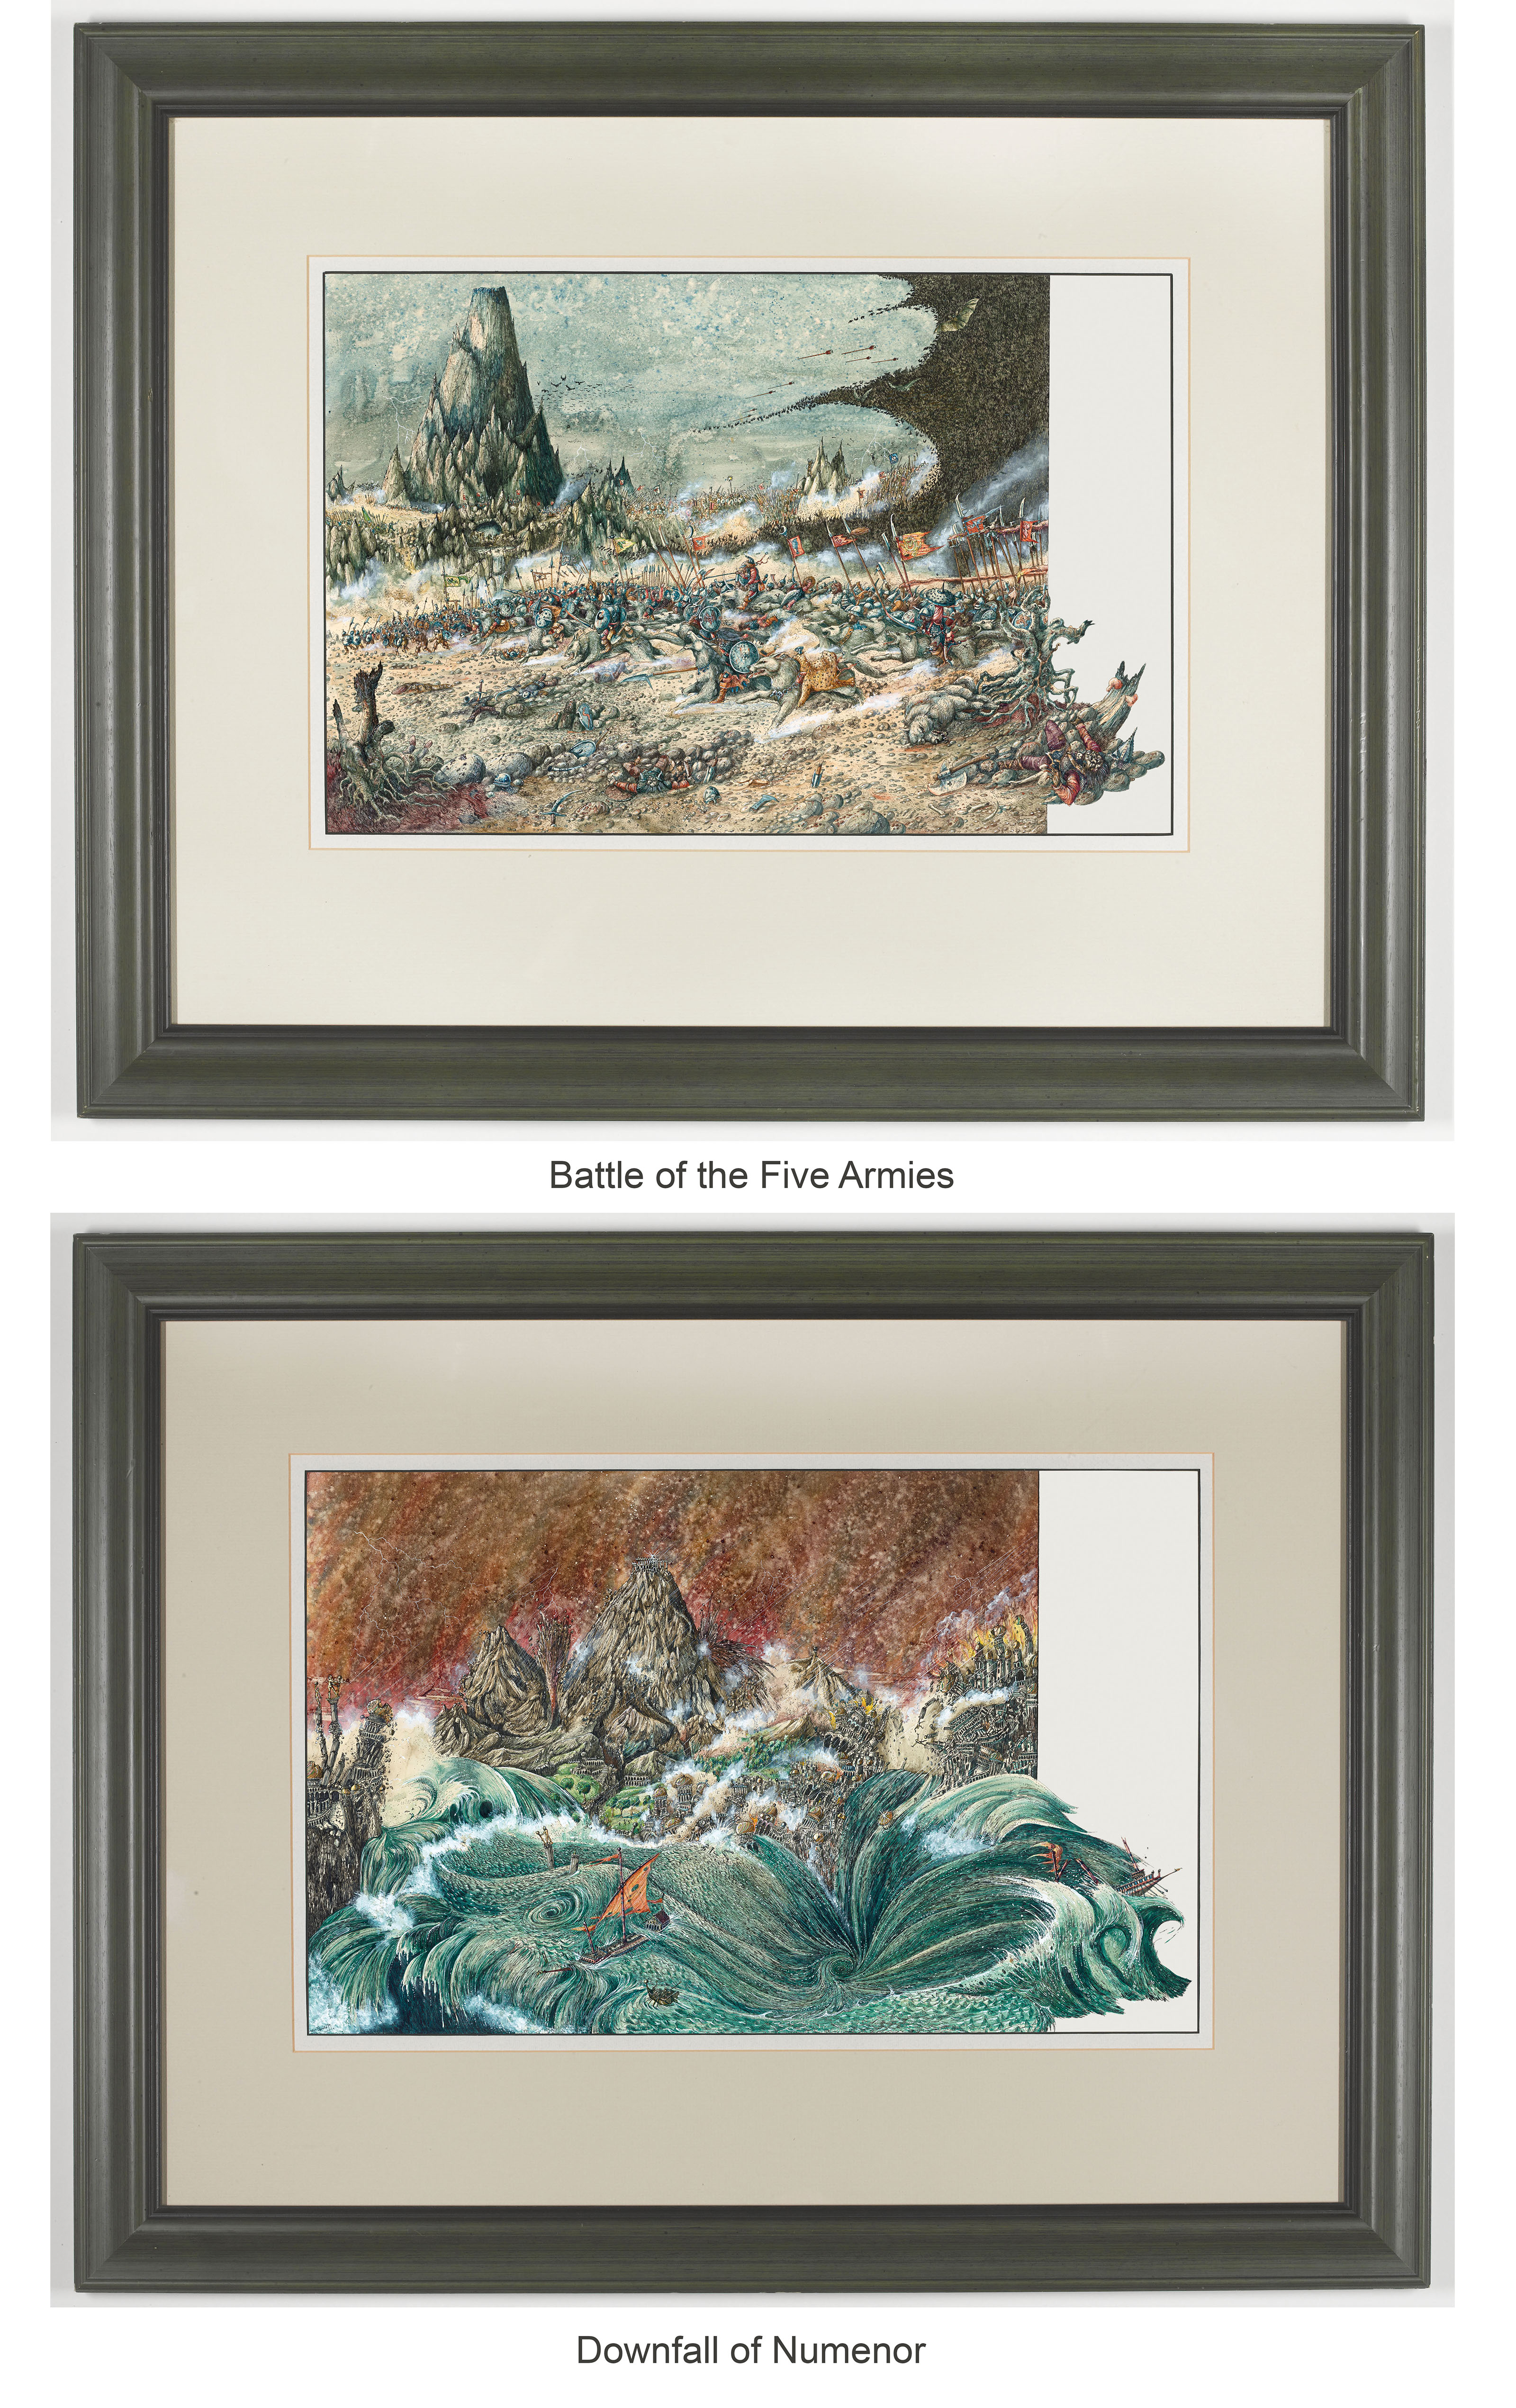 The Original artwork “Battle of Five Armies” & “Downfall of Númenor” ready for auction by John Blanche